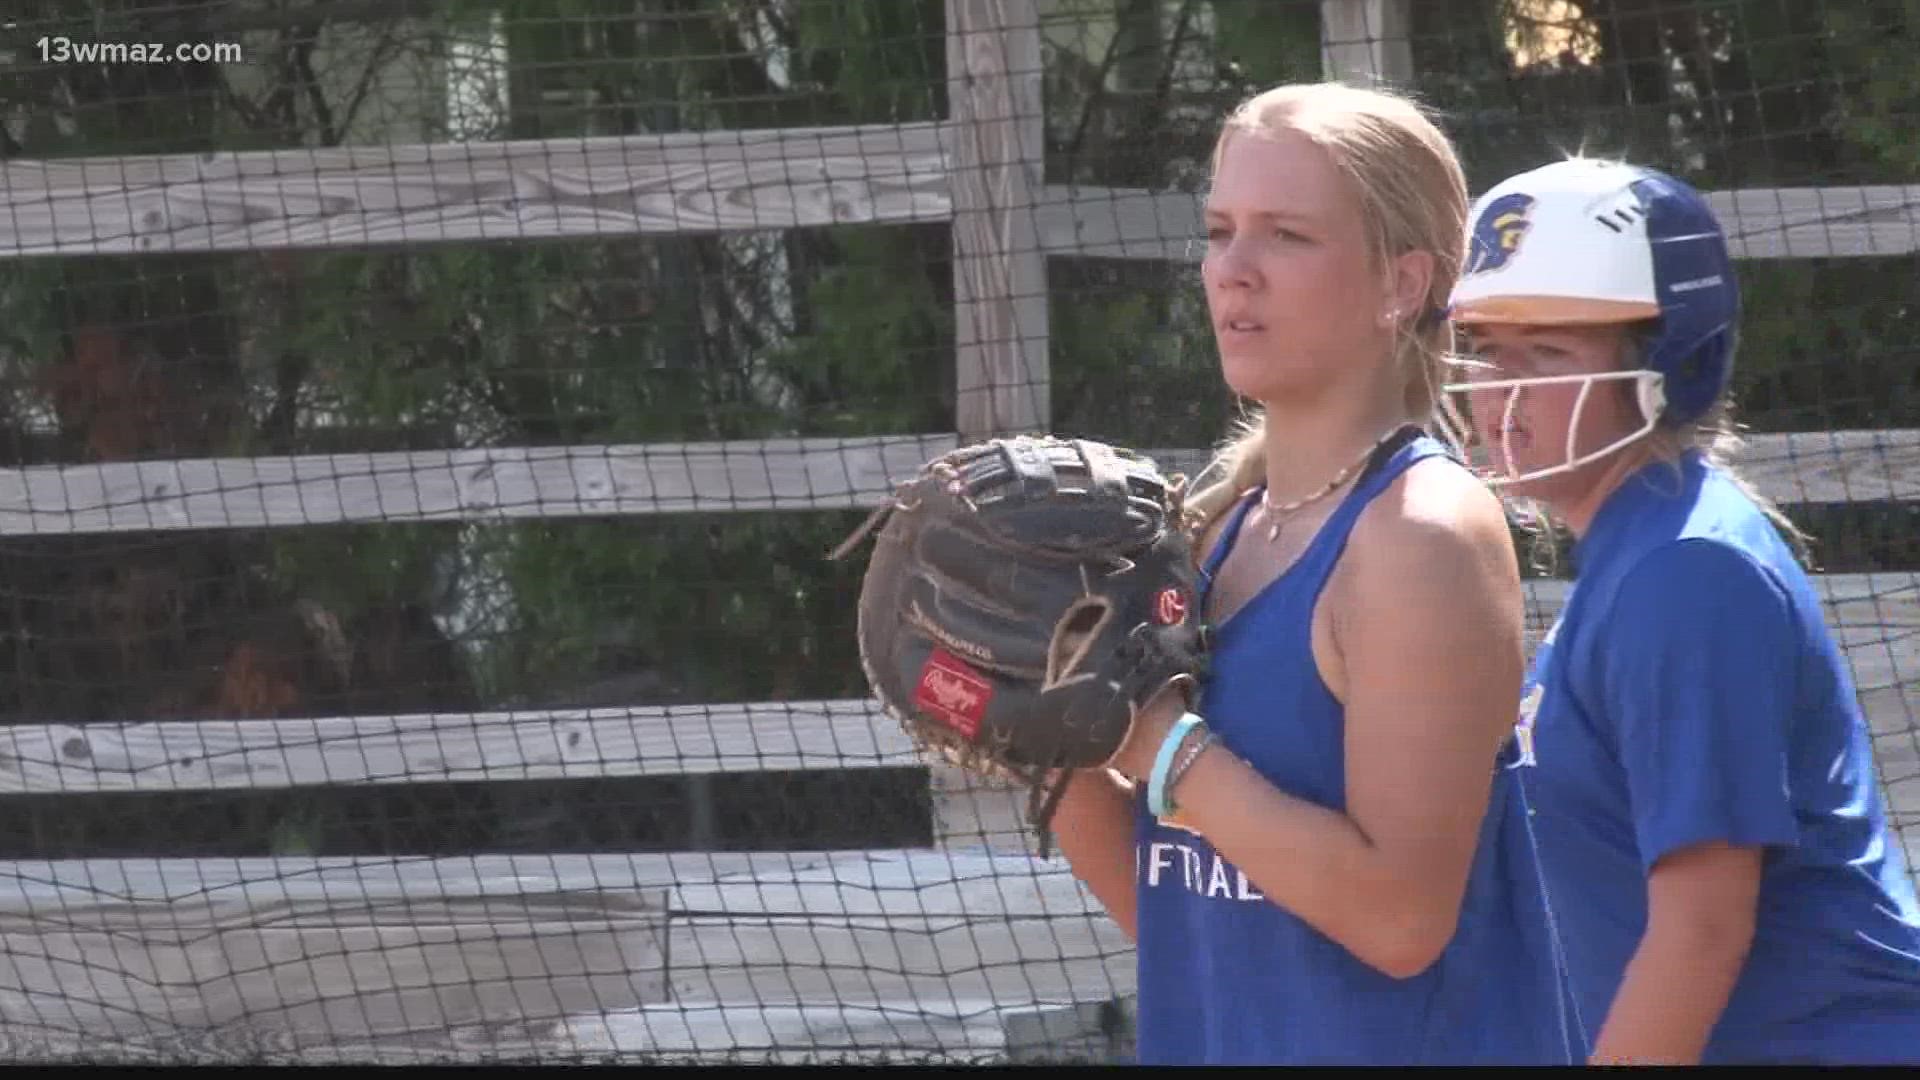 High school softball season is alive and well for student athletes in Central Georgia, especially for one slugger here in the area